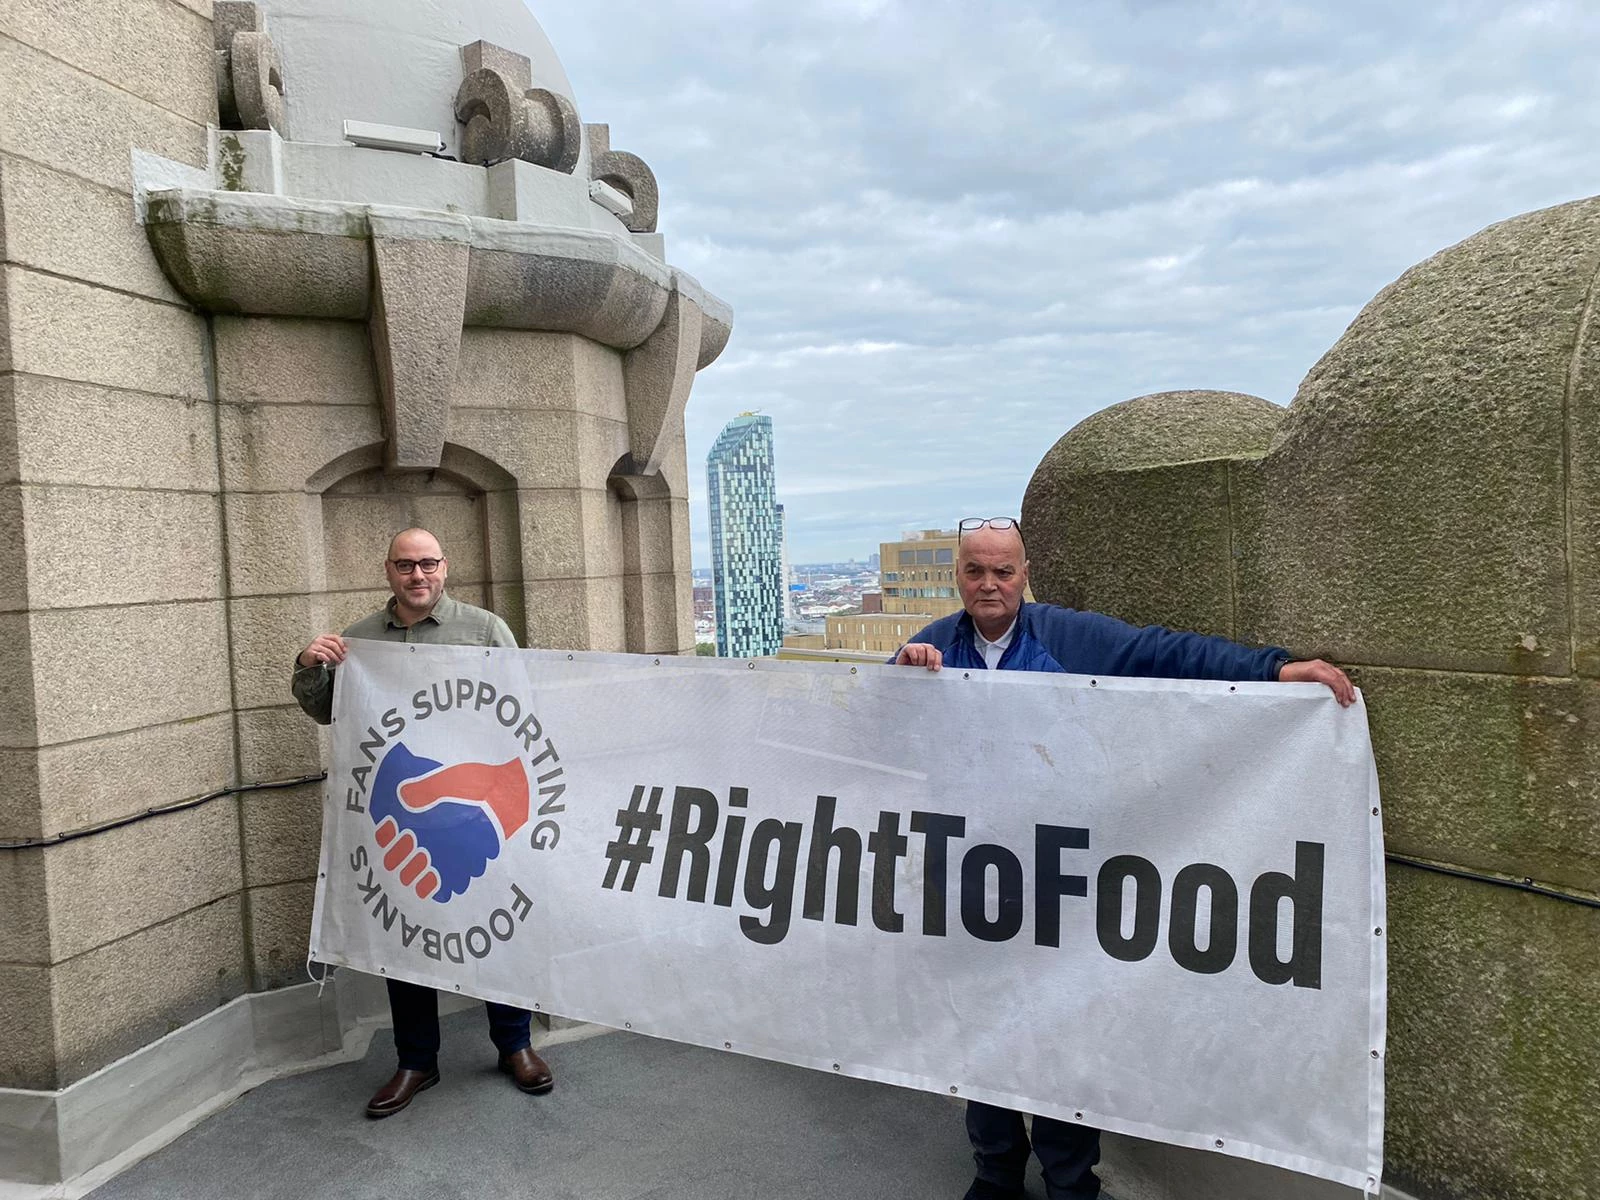 A picture of Fans Supporting Foodbanks organiser Dave Kelly (R) standing at the RLB360 attraction with Chris Devaney, who runs the activity, has been attached